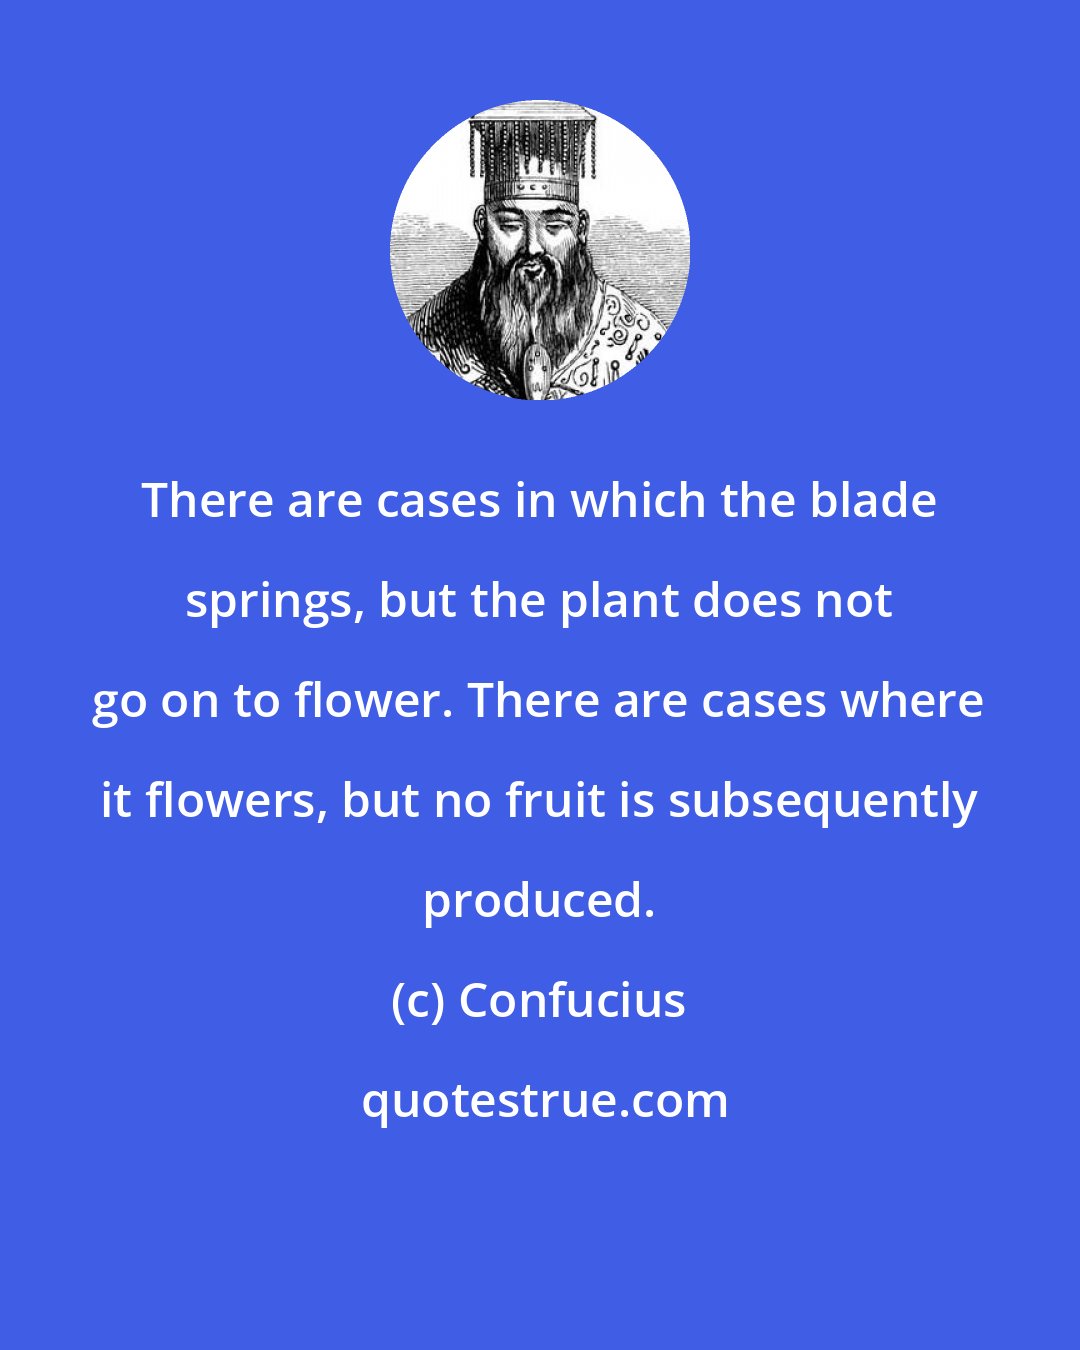 Confucius: There are cases in which the blade springs, but the plant does not go on to flower. There are cases where it flowers, but no fruit is subsequently produced.